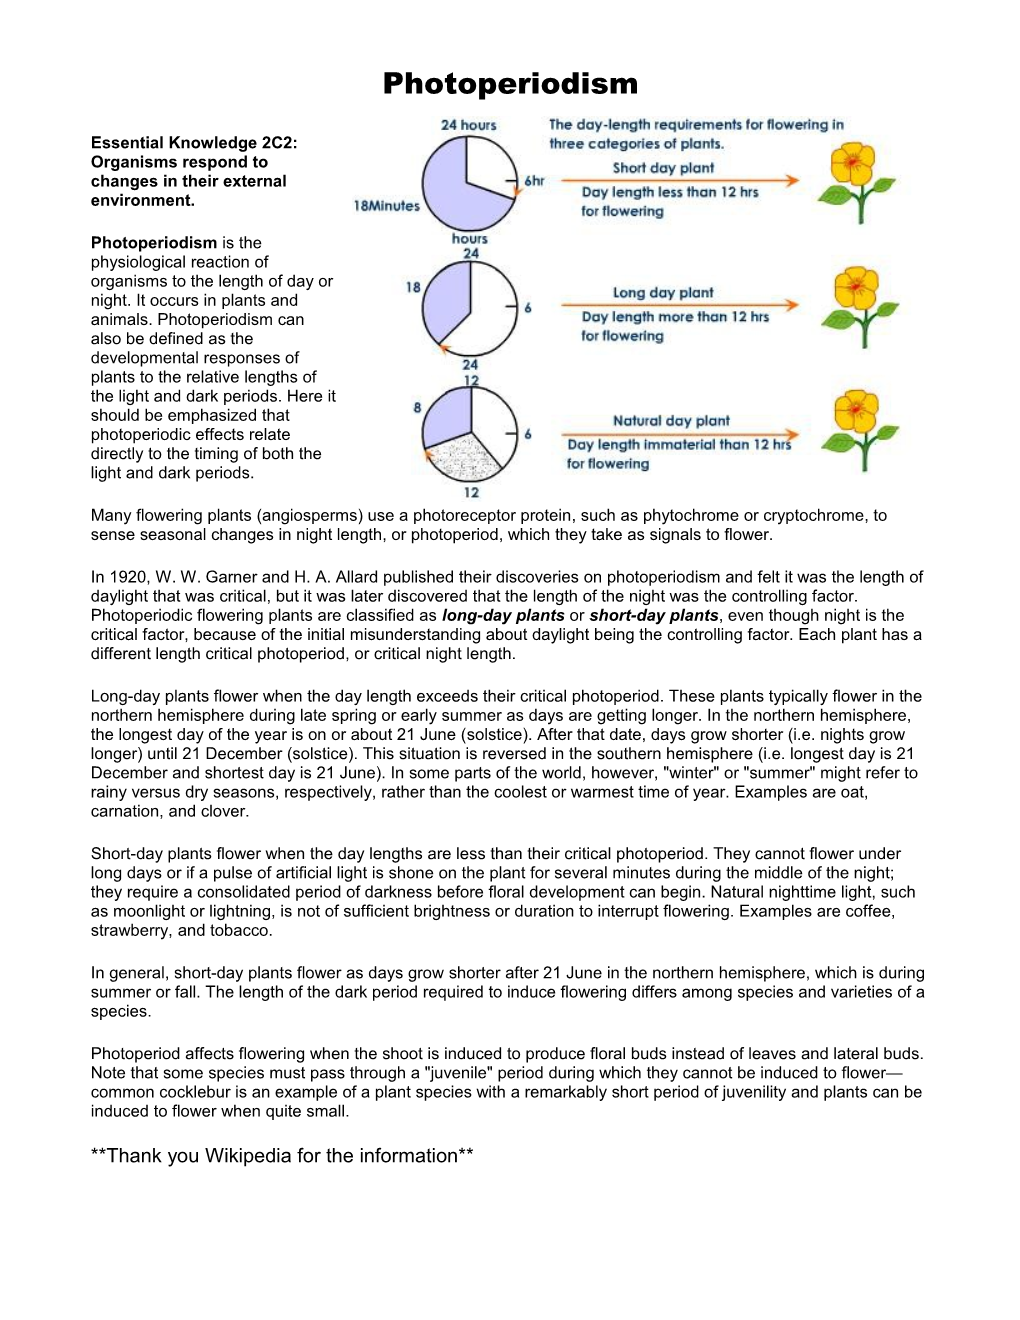 Essential Knowledge 2C2: Organisms Respond to Changes in Their External Environment